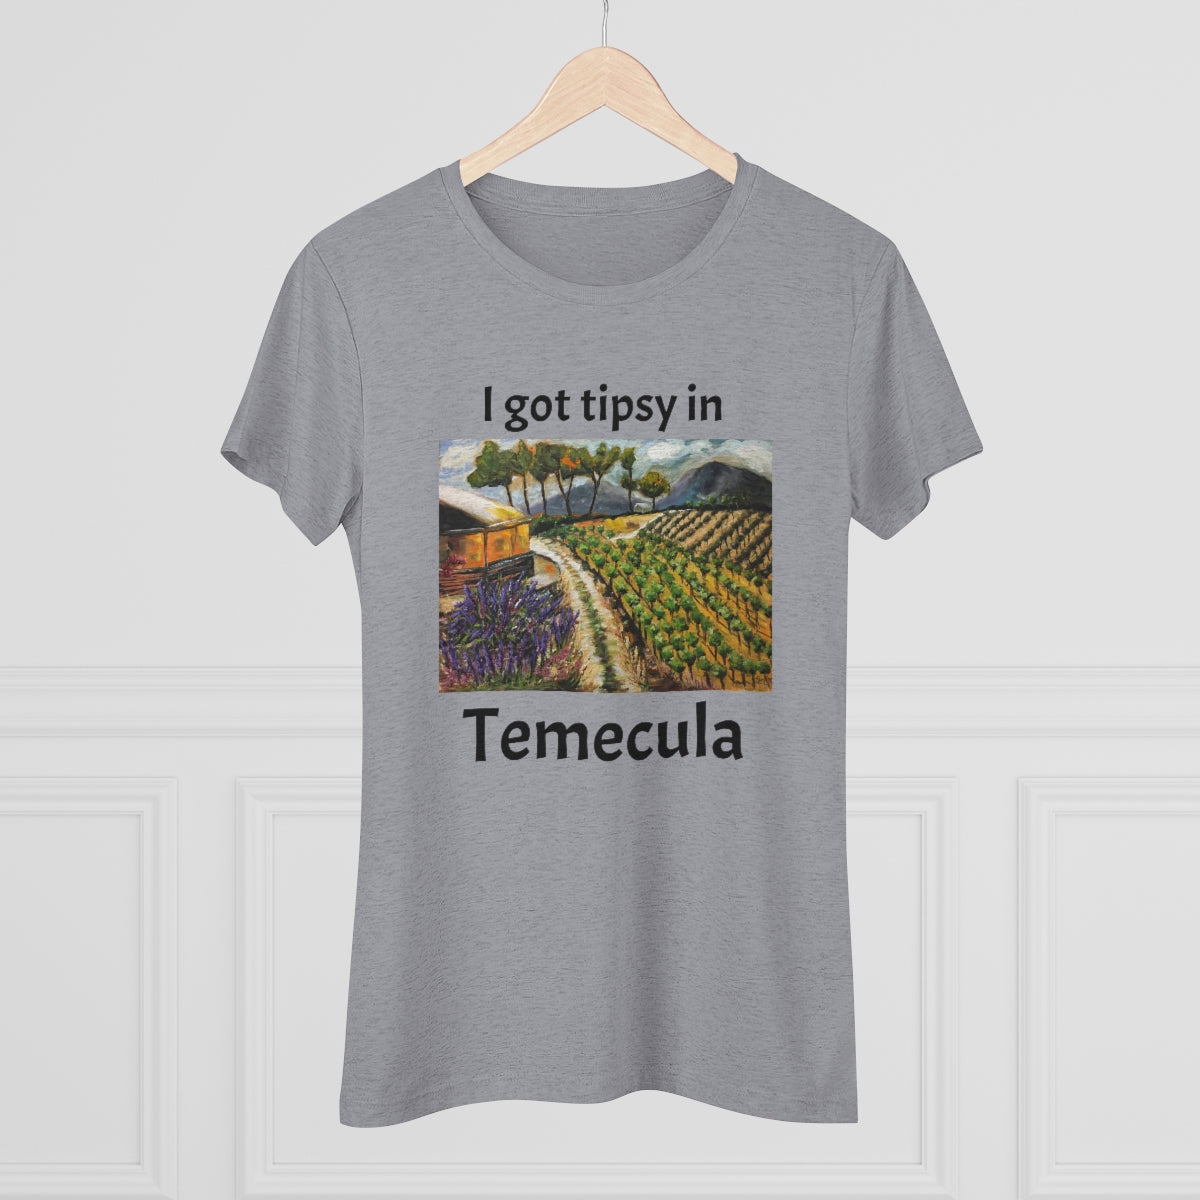 I got tipsy in Temecula Women's fitted Triblend Tee Temecula tee shirt souvenir "Summer Vines"